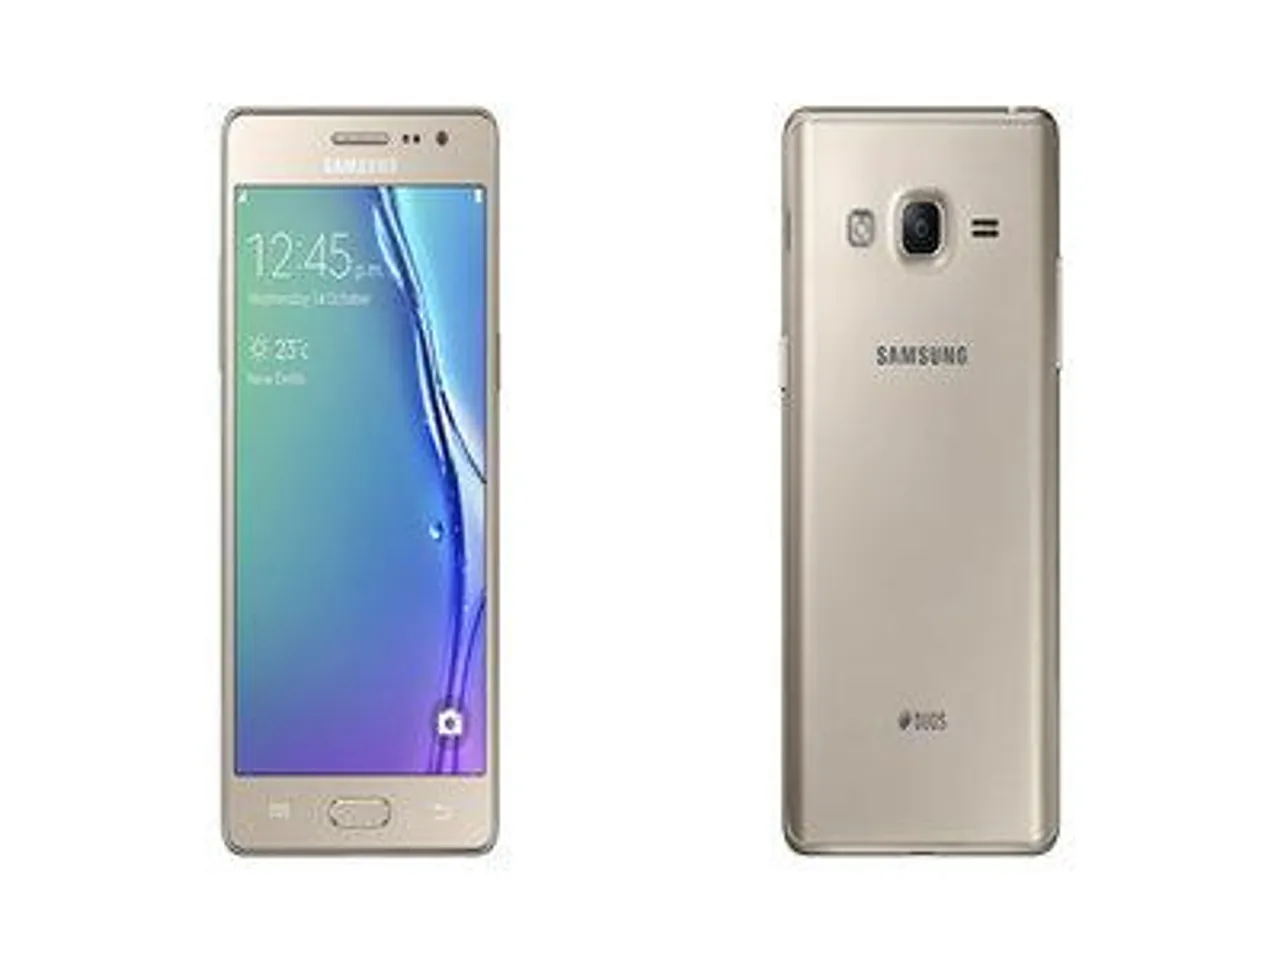 Samsung launches Tizen-powered Z3 smartphone, priced at Rs 8,490